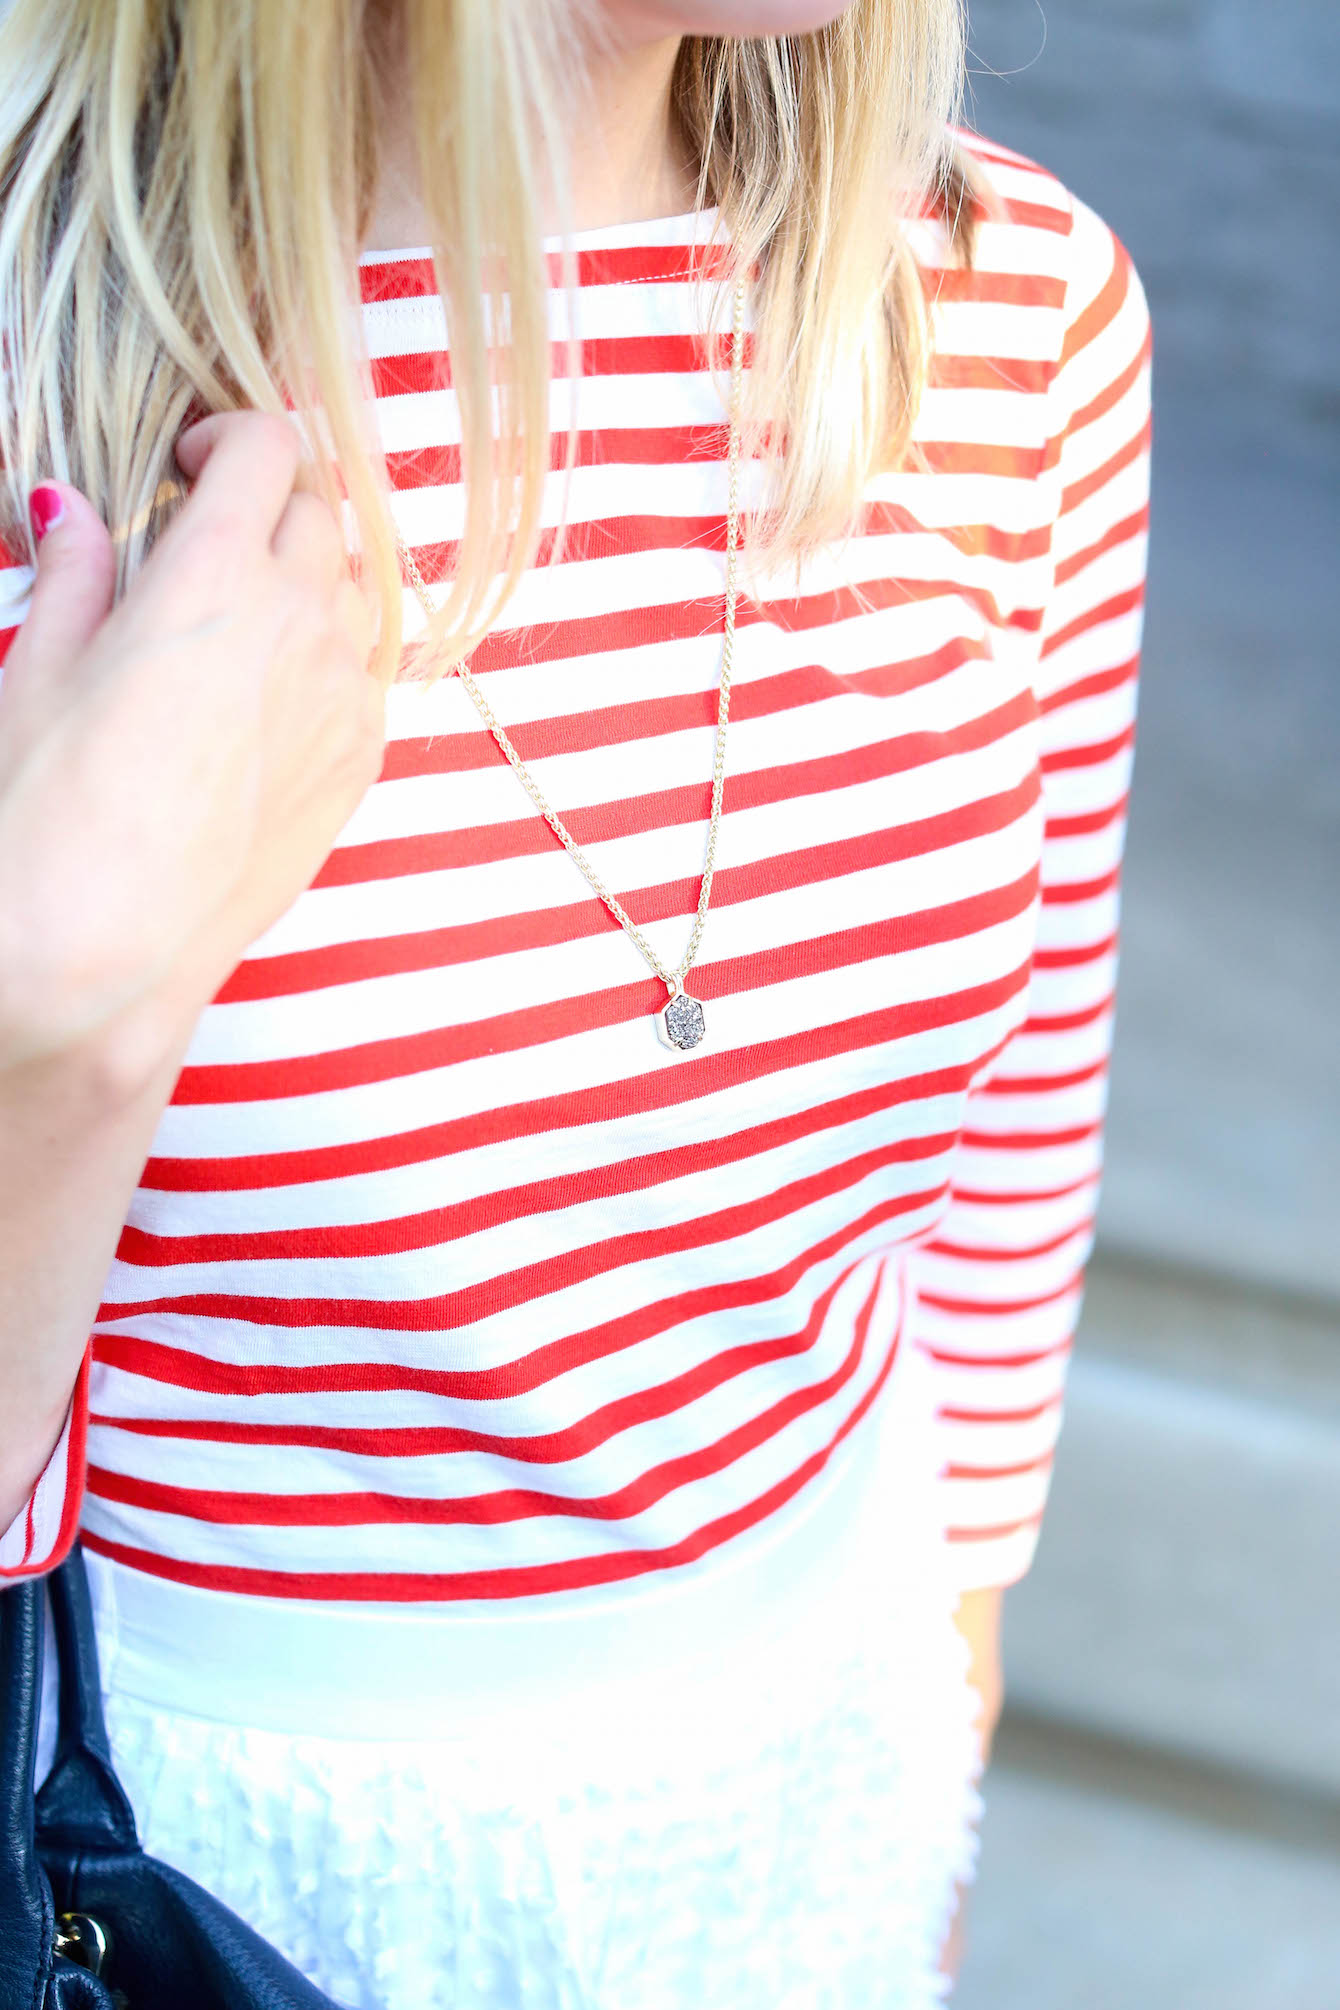 Charmingly-Styled-Stripes (5 of 16)